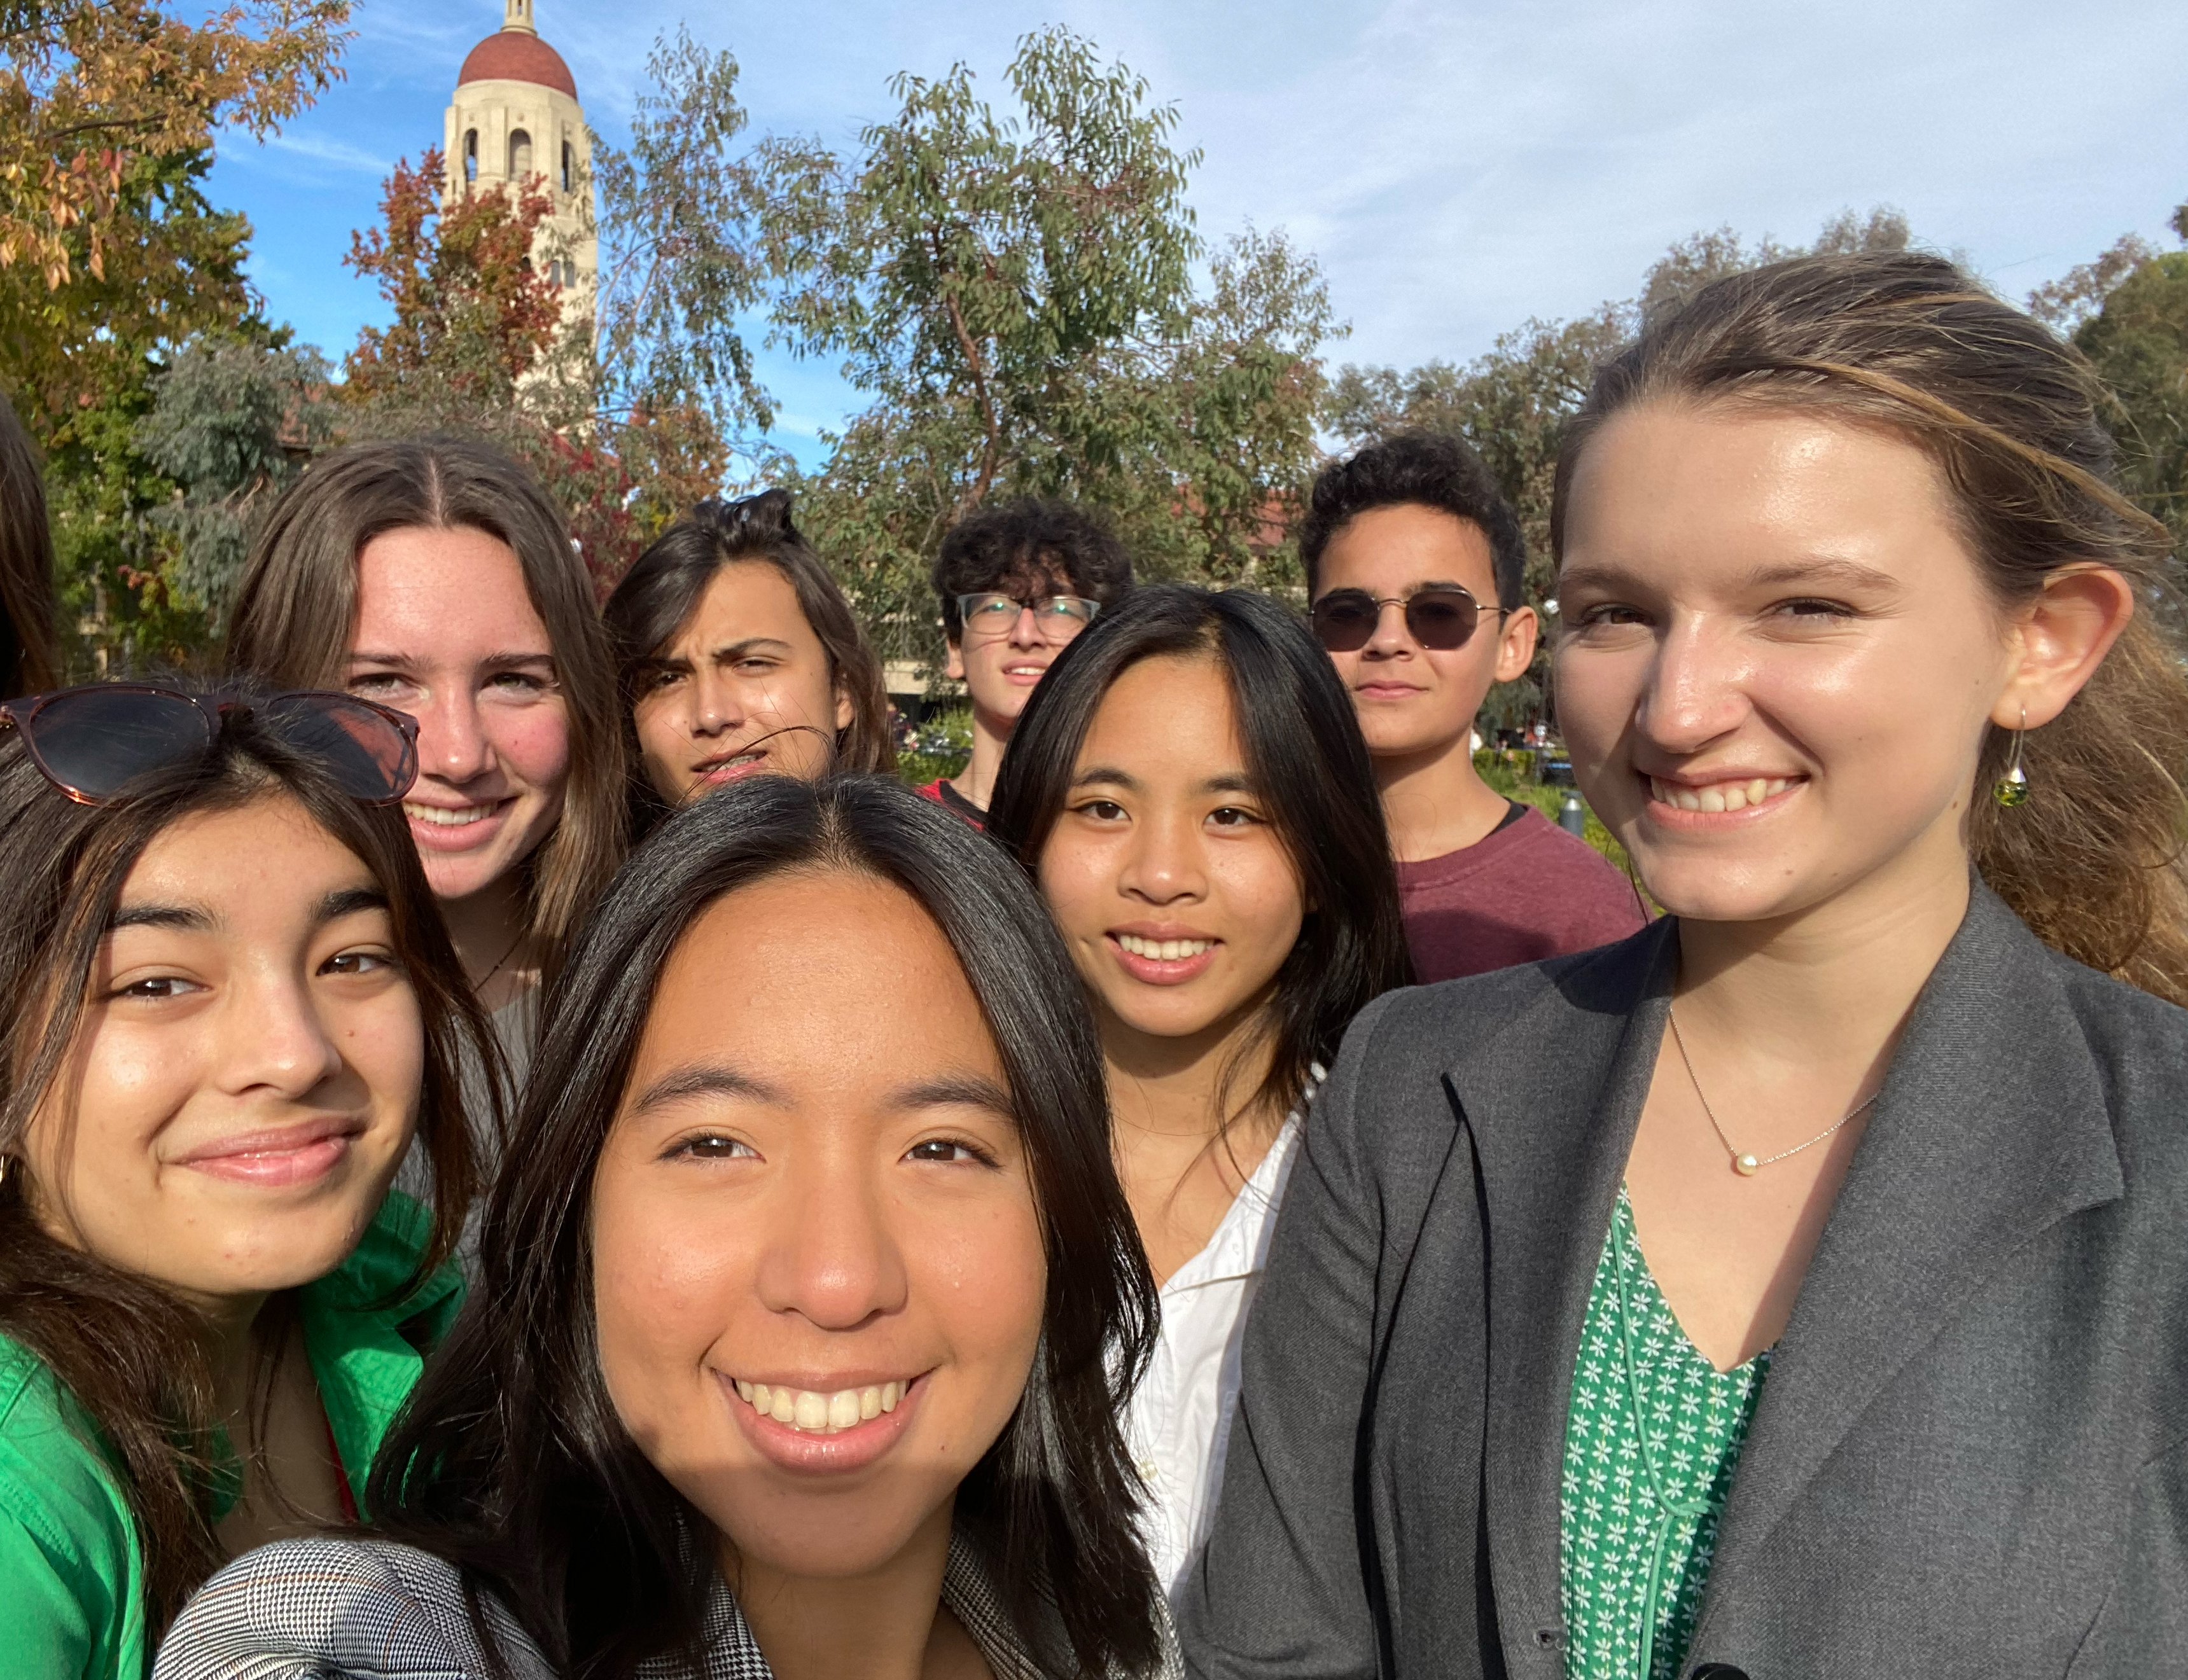 INTL at the Stanford University Model United Nations Conference XXVI